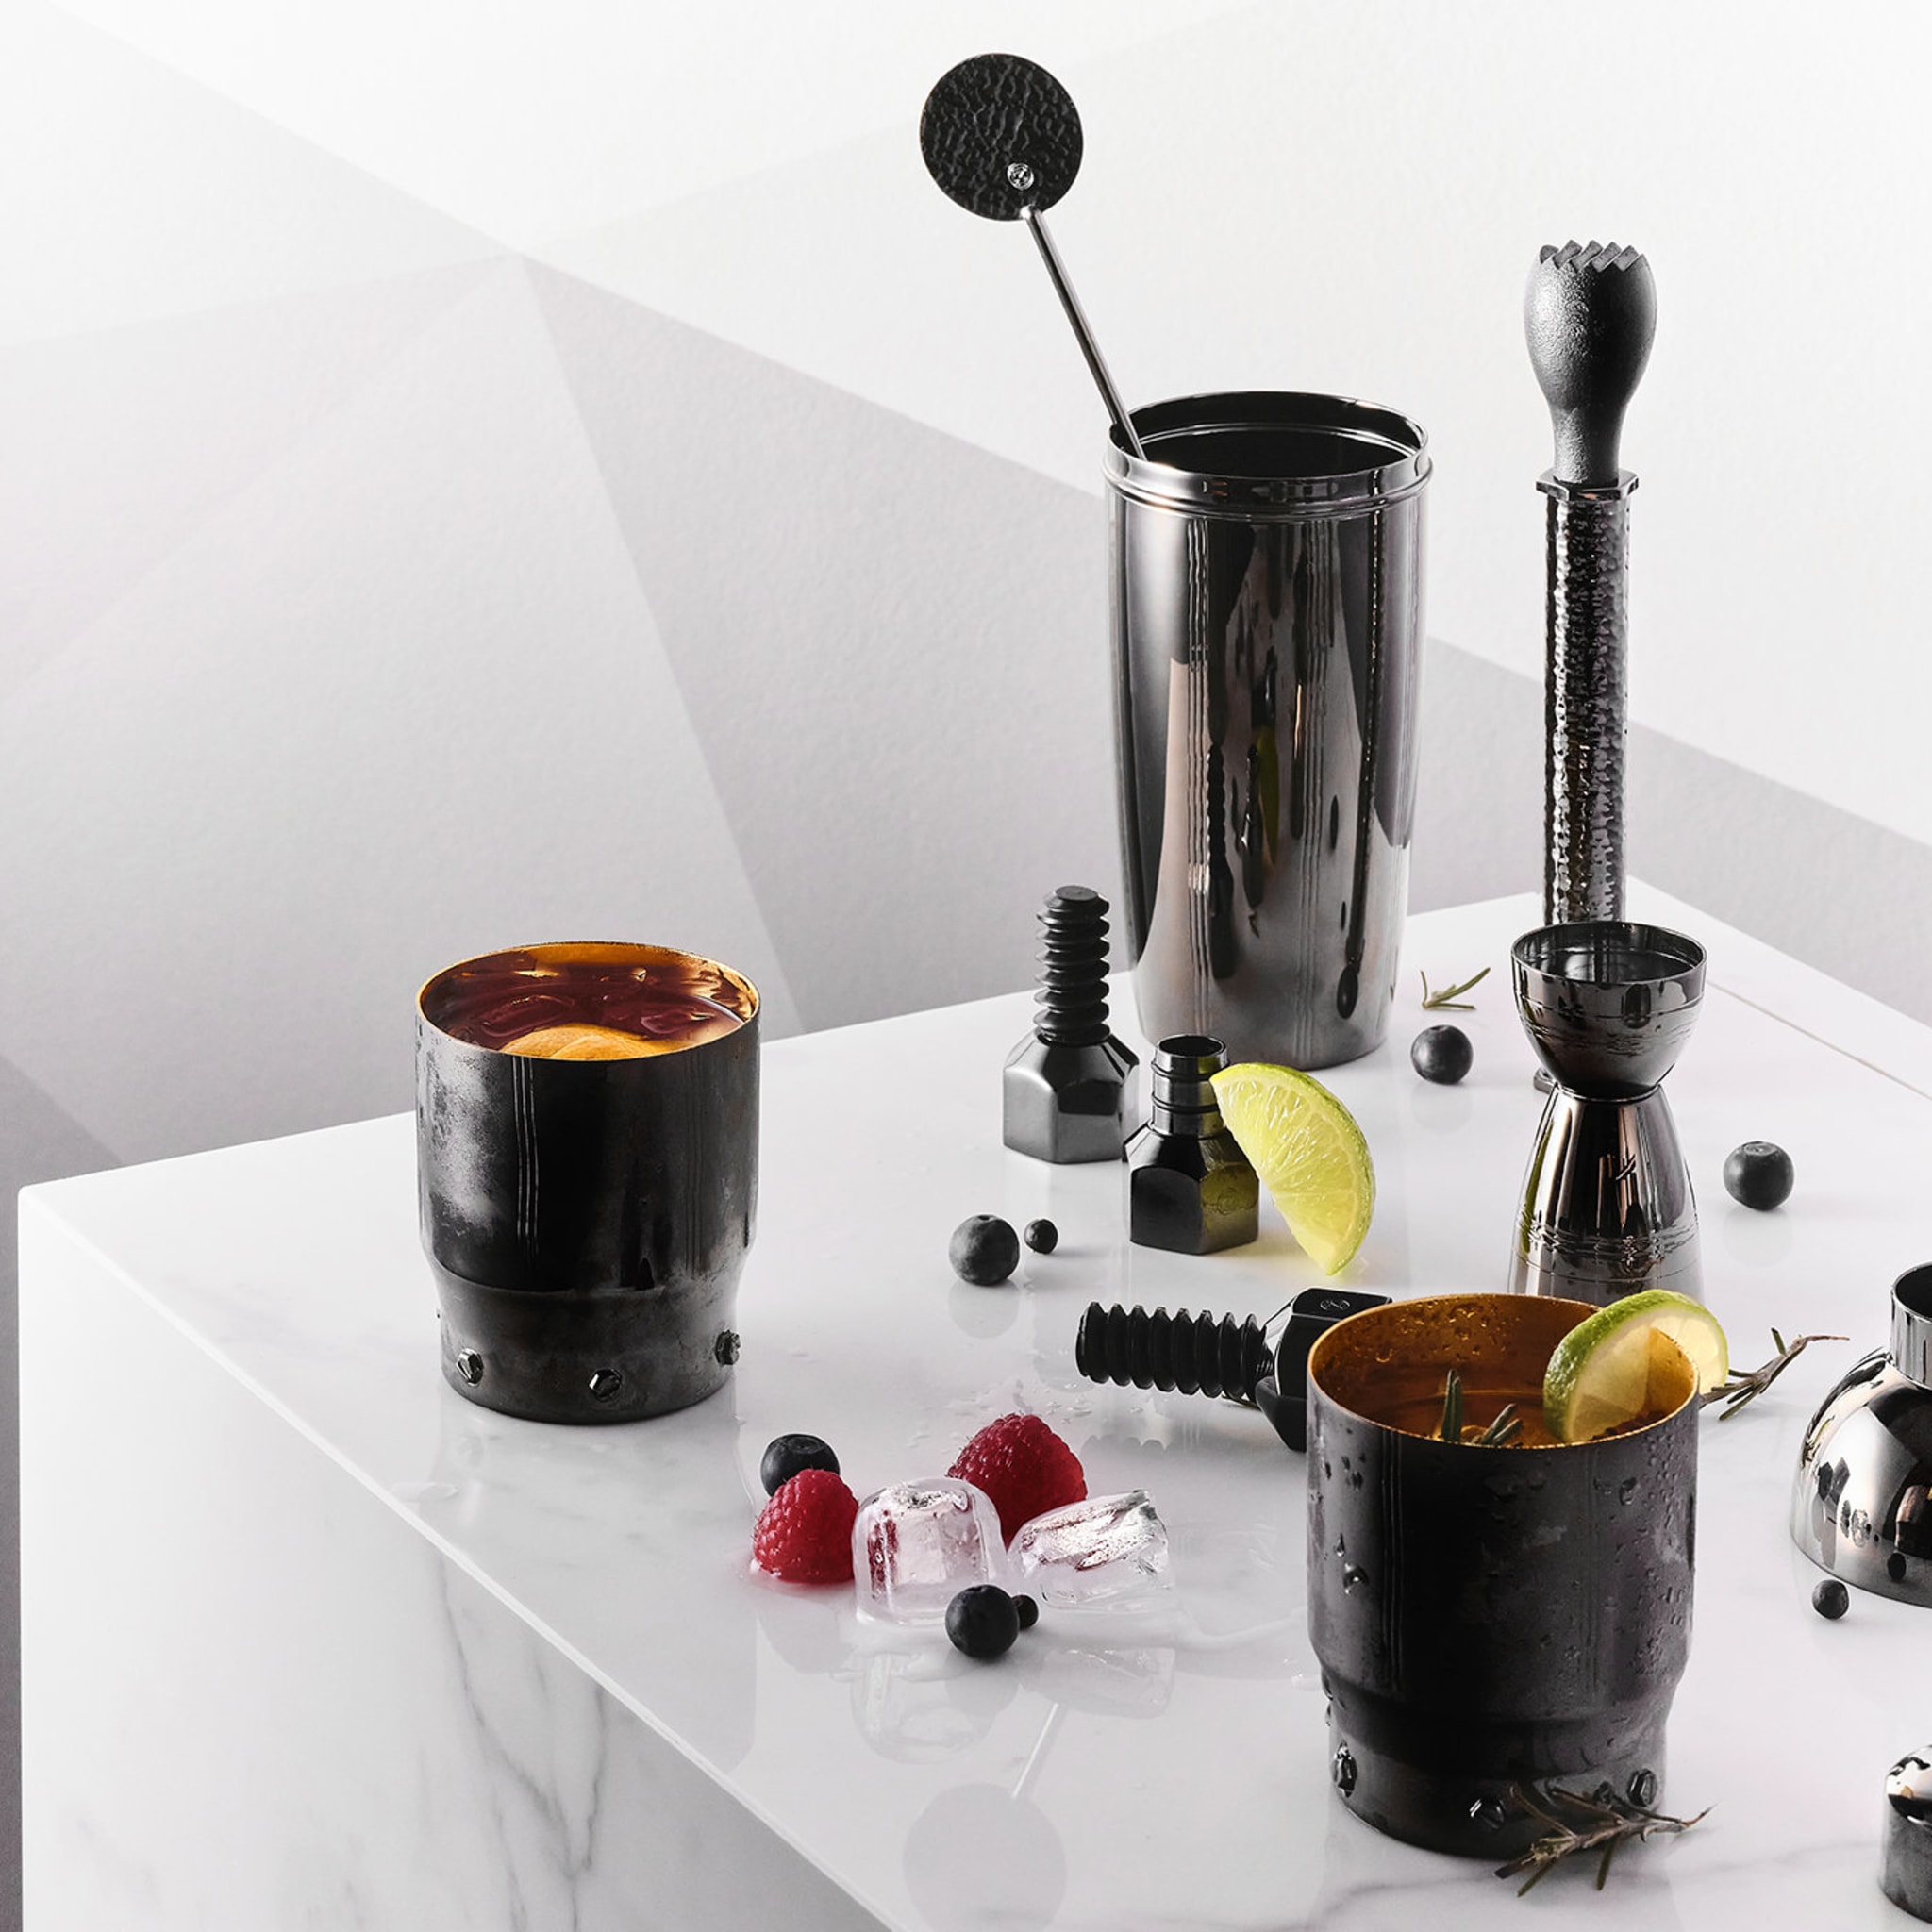 Mixer Barock Collection designed by Samer Alameen - Alternative view 3